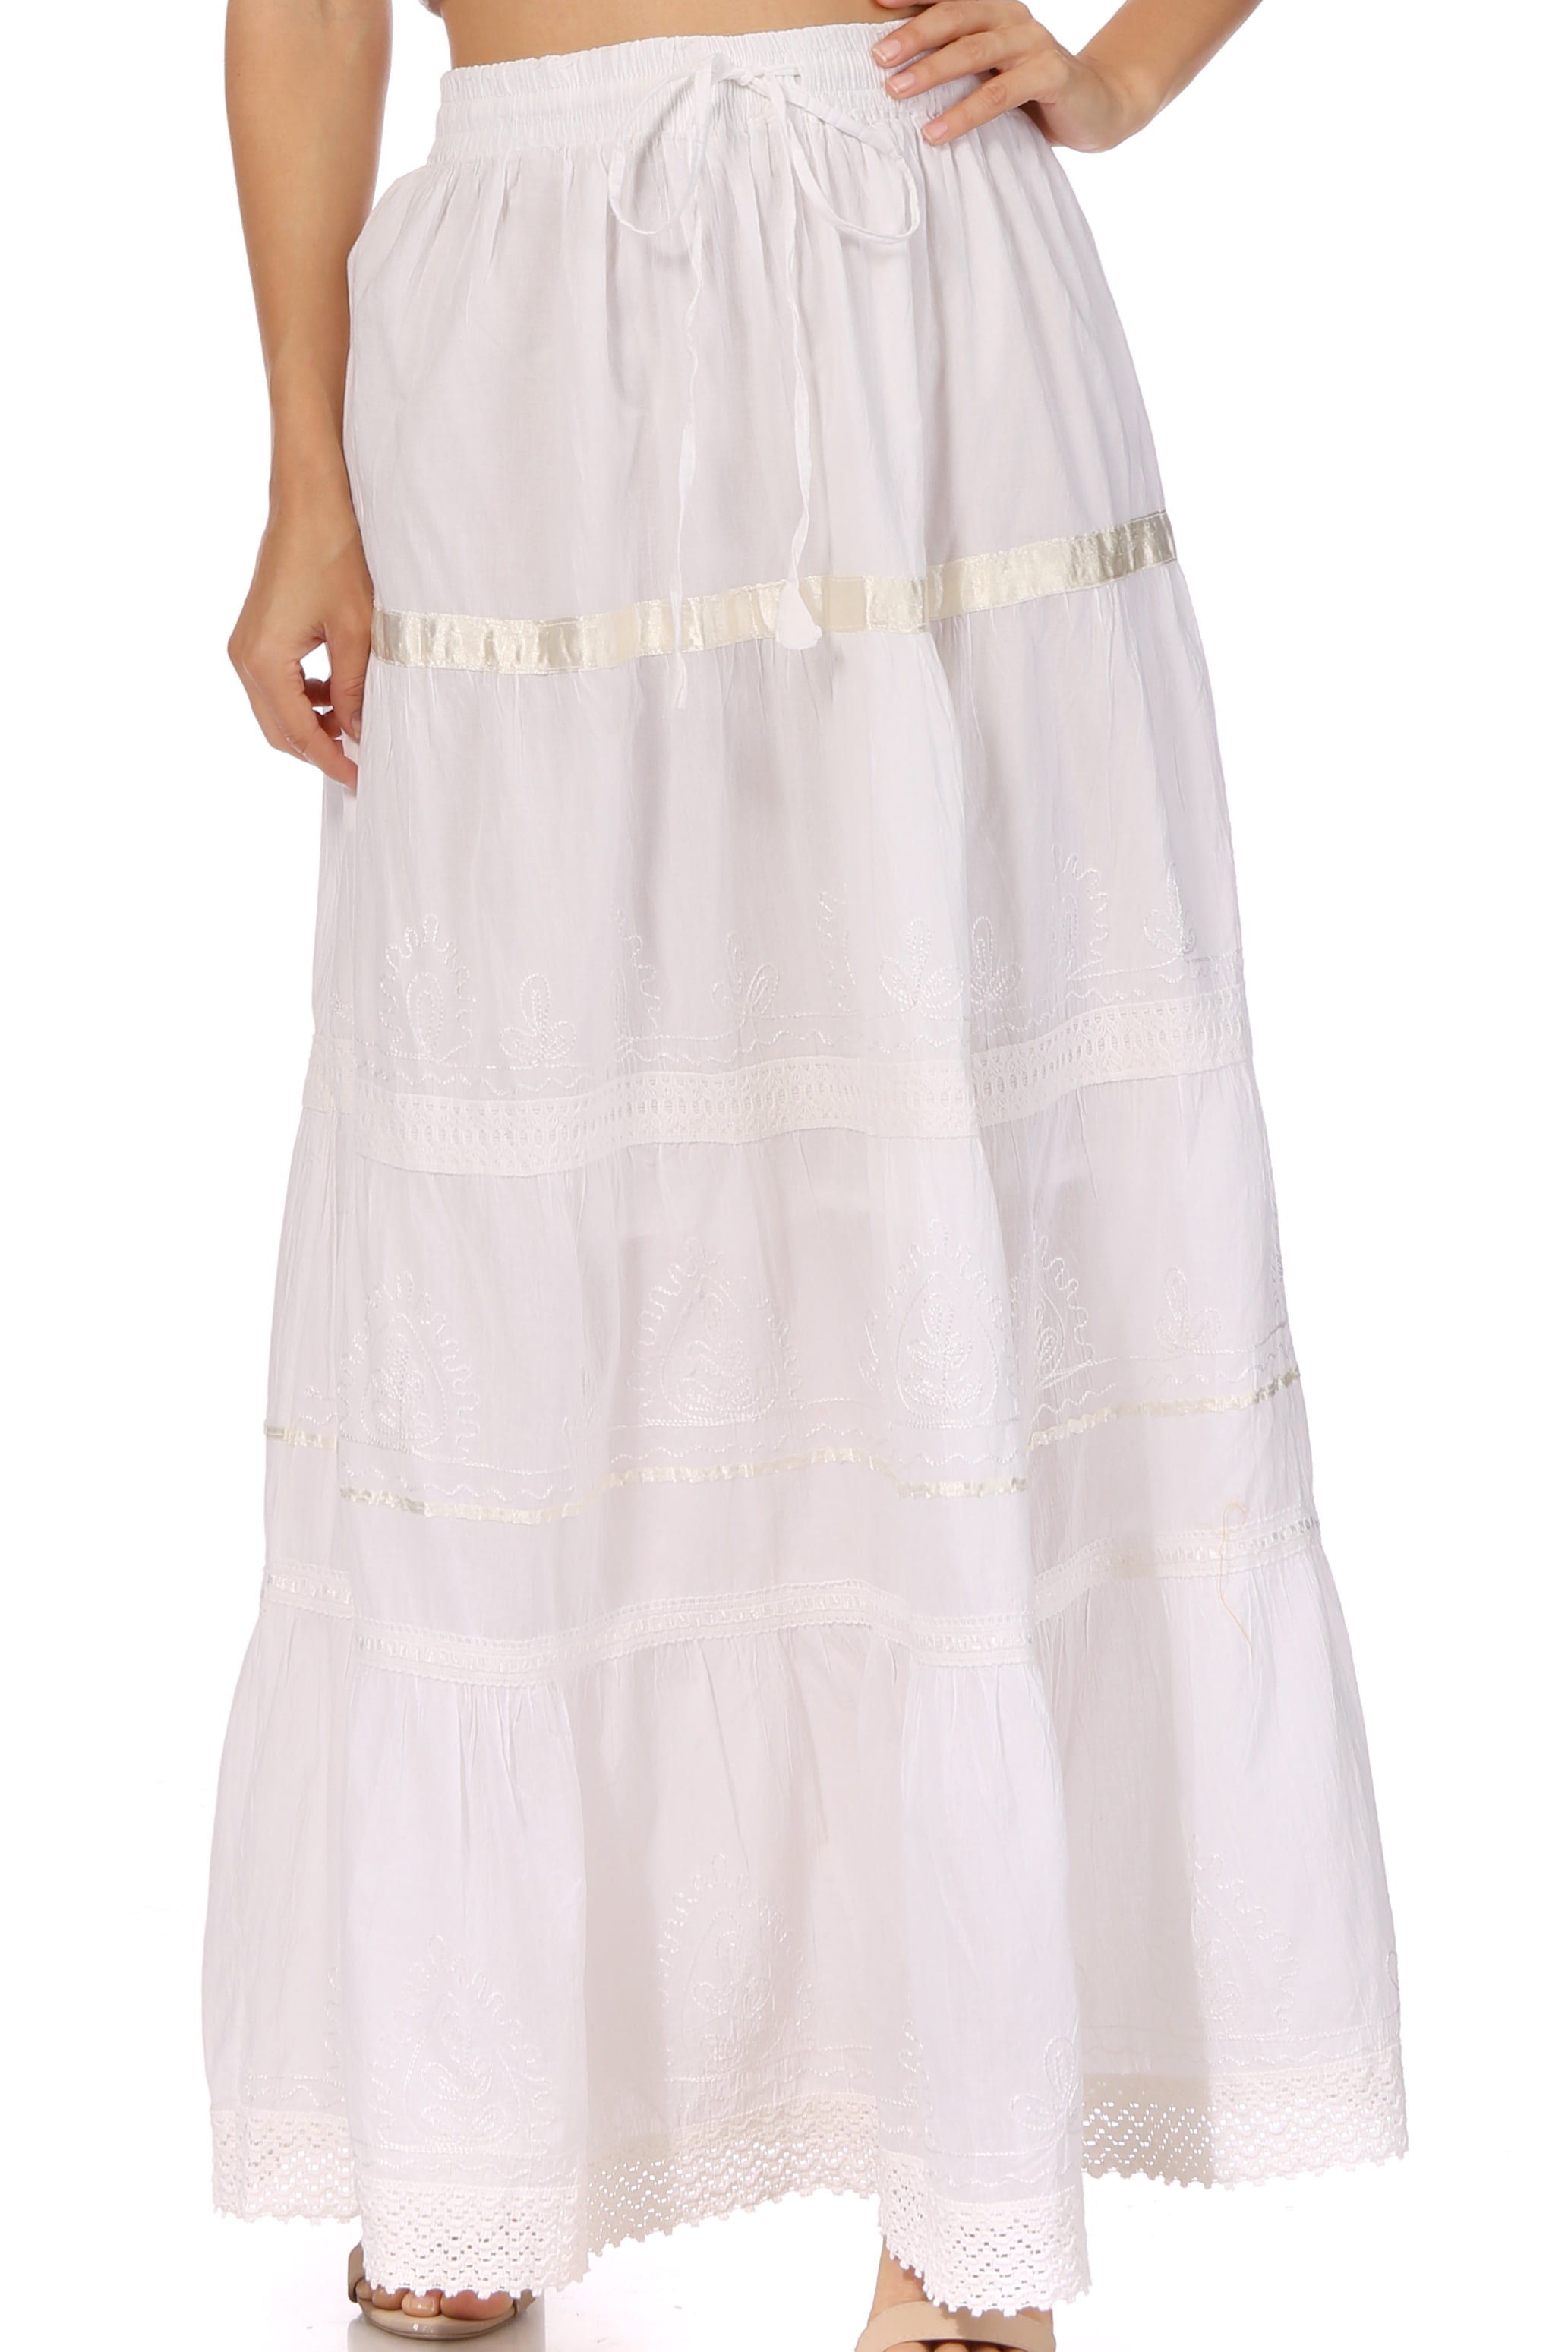 Sakkas Solid Embroidered Gypsy / Bohemian Full / Maxi / Long Cotton Skirt -  White - One Size - Walmart.com